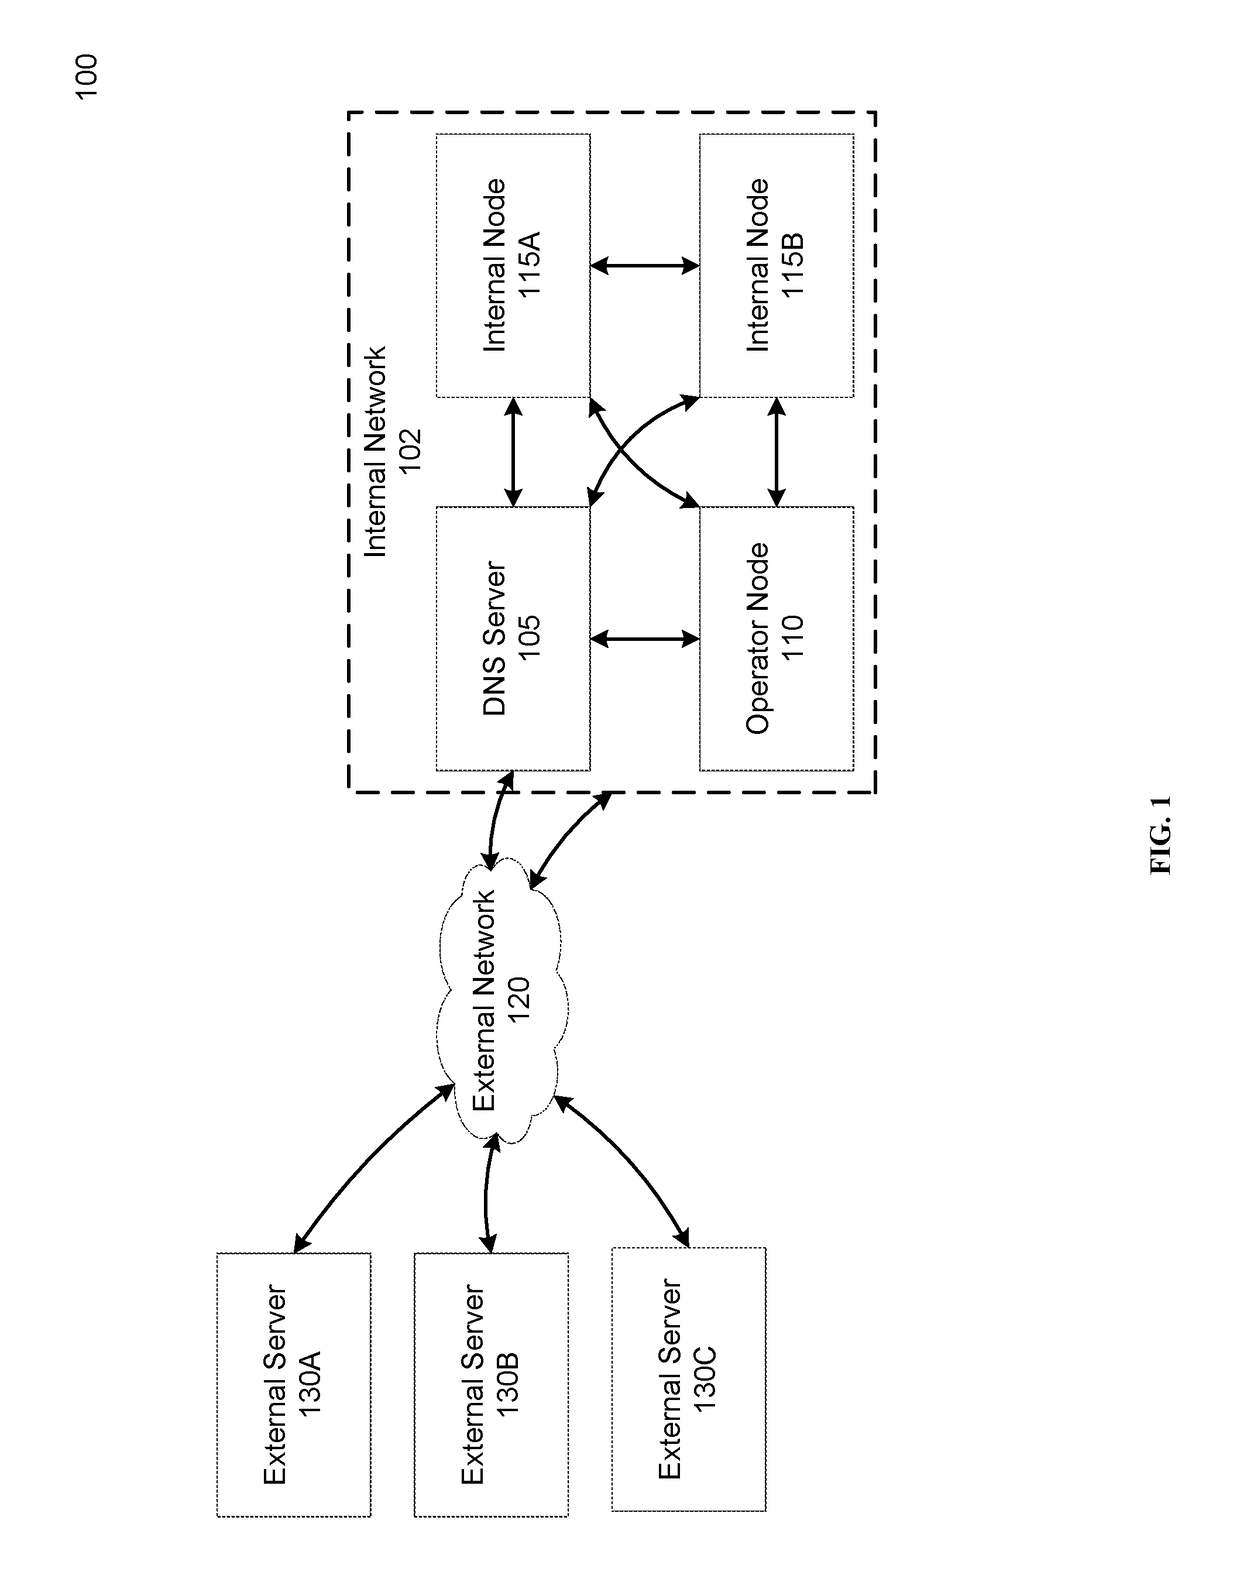 Network isolation by policy compliance evaluation